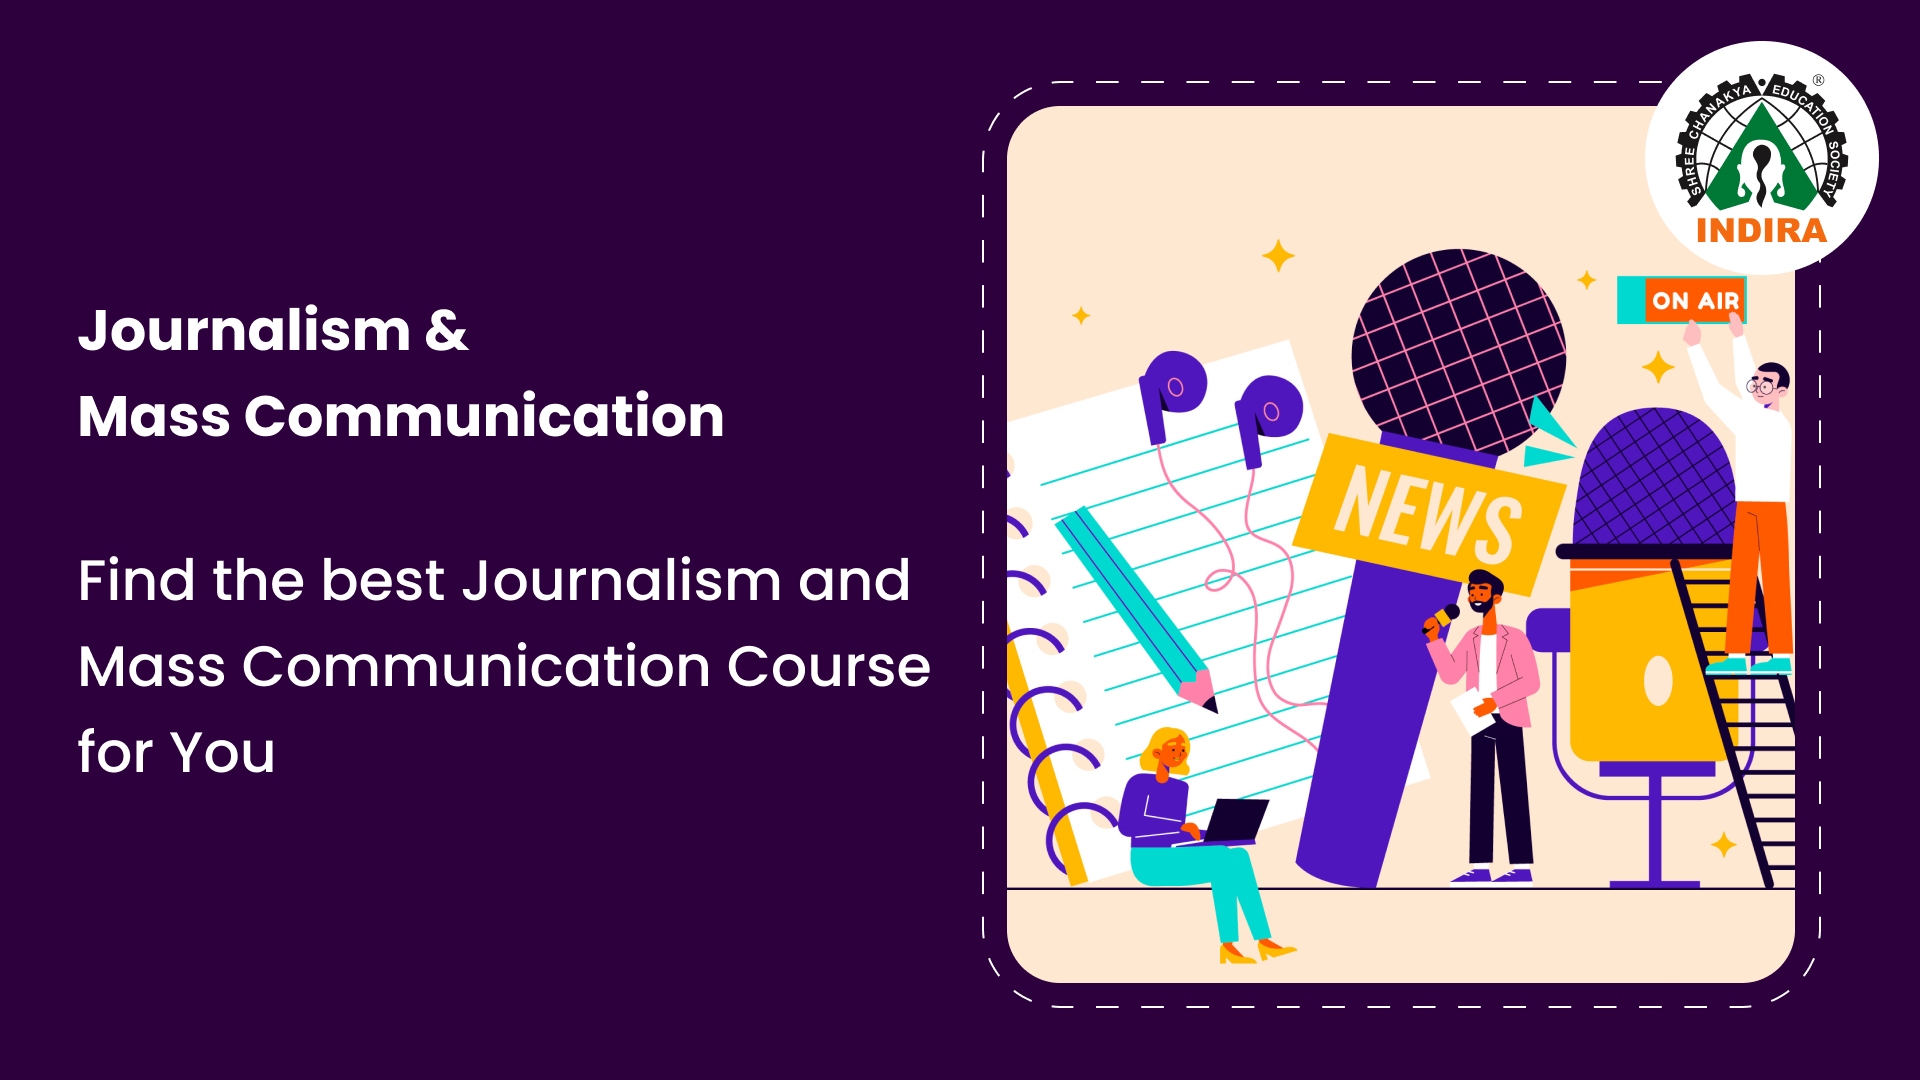  Find the best Journalism and Mass Communication Course for You